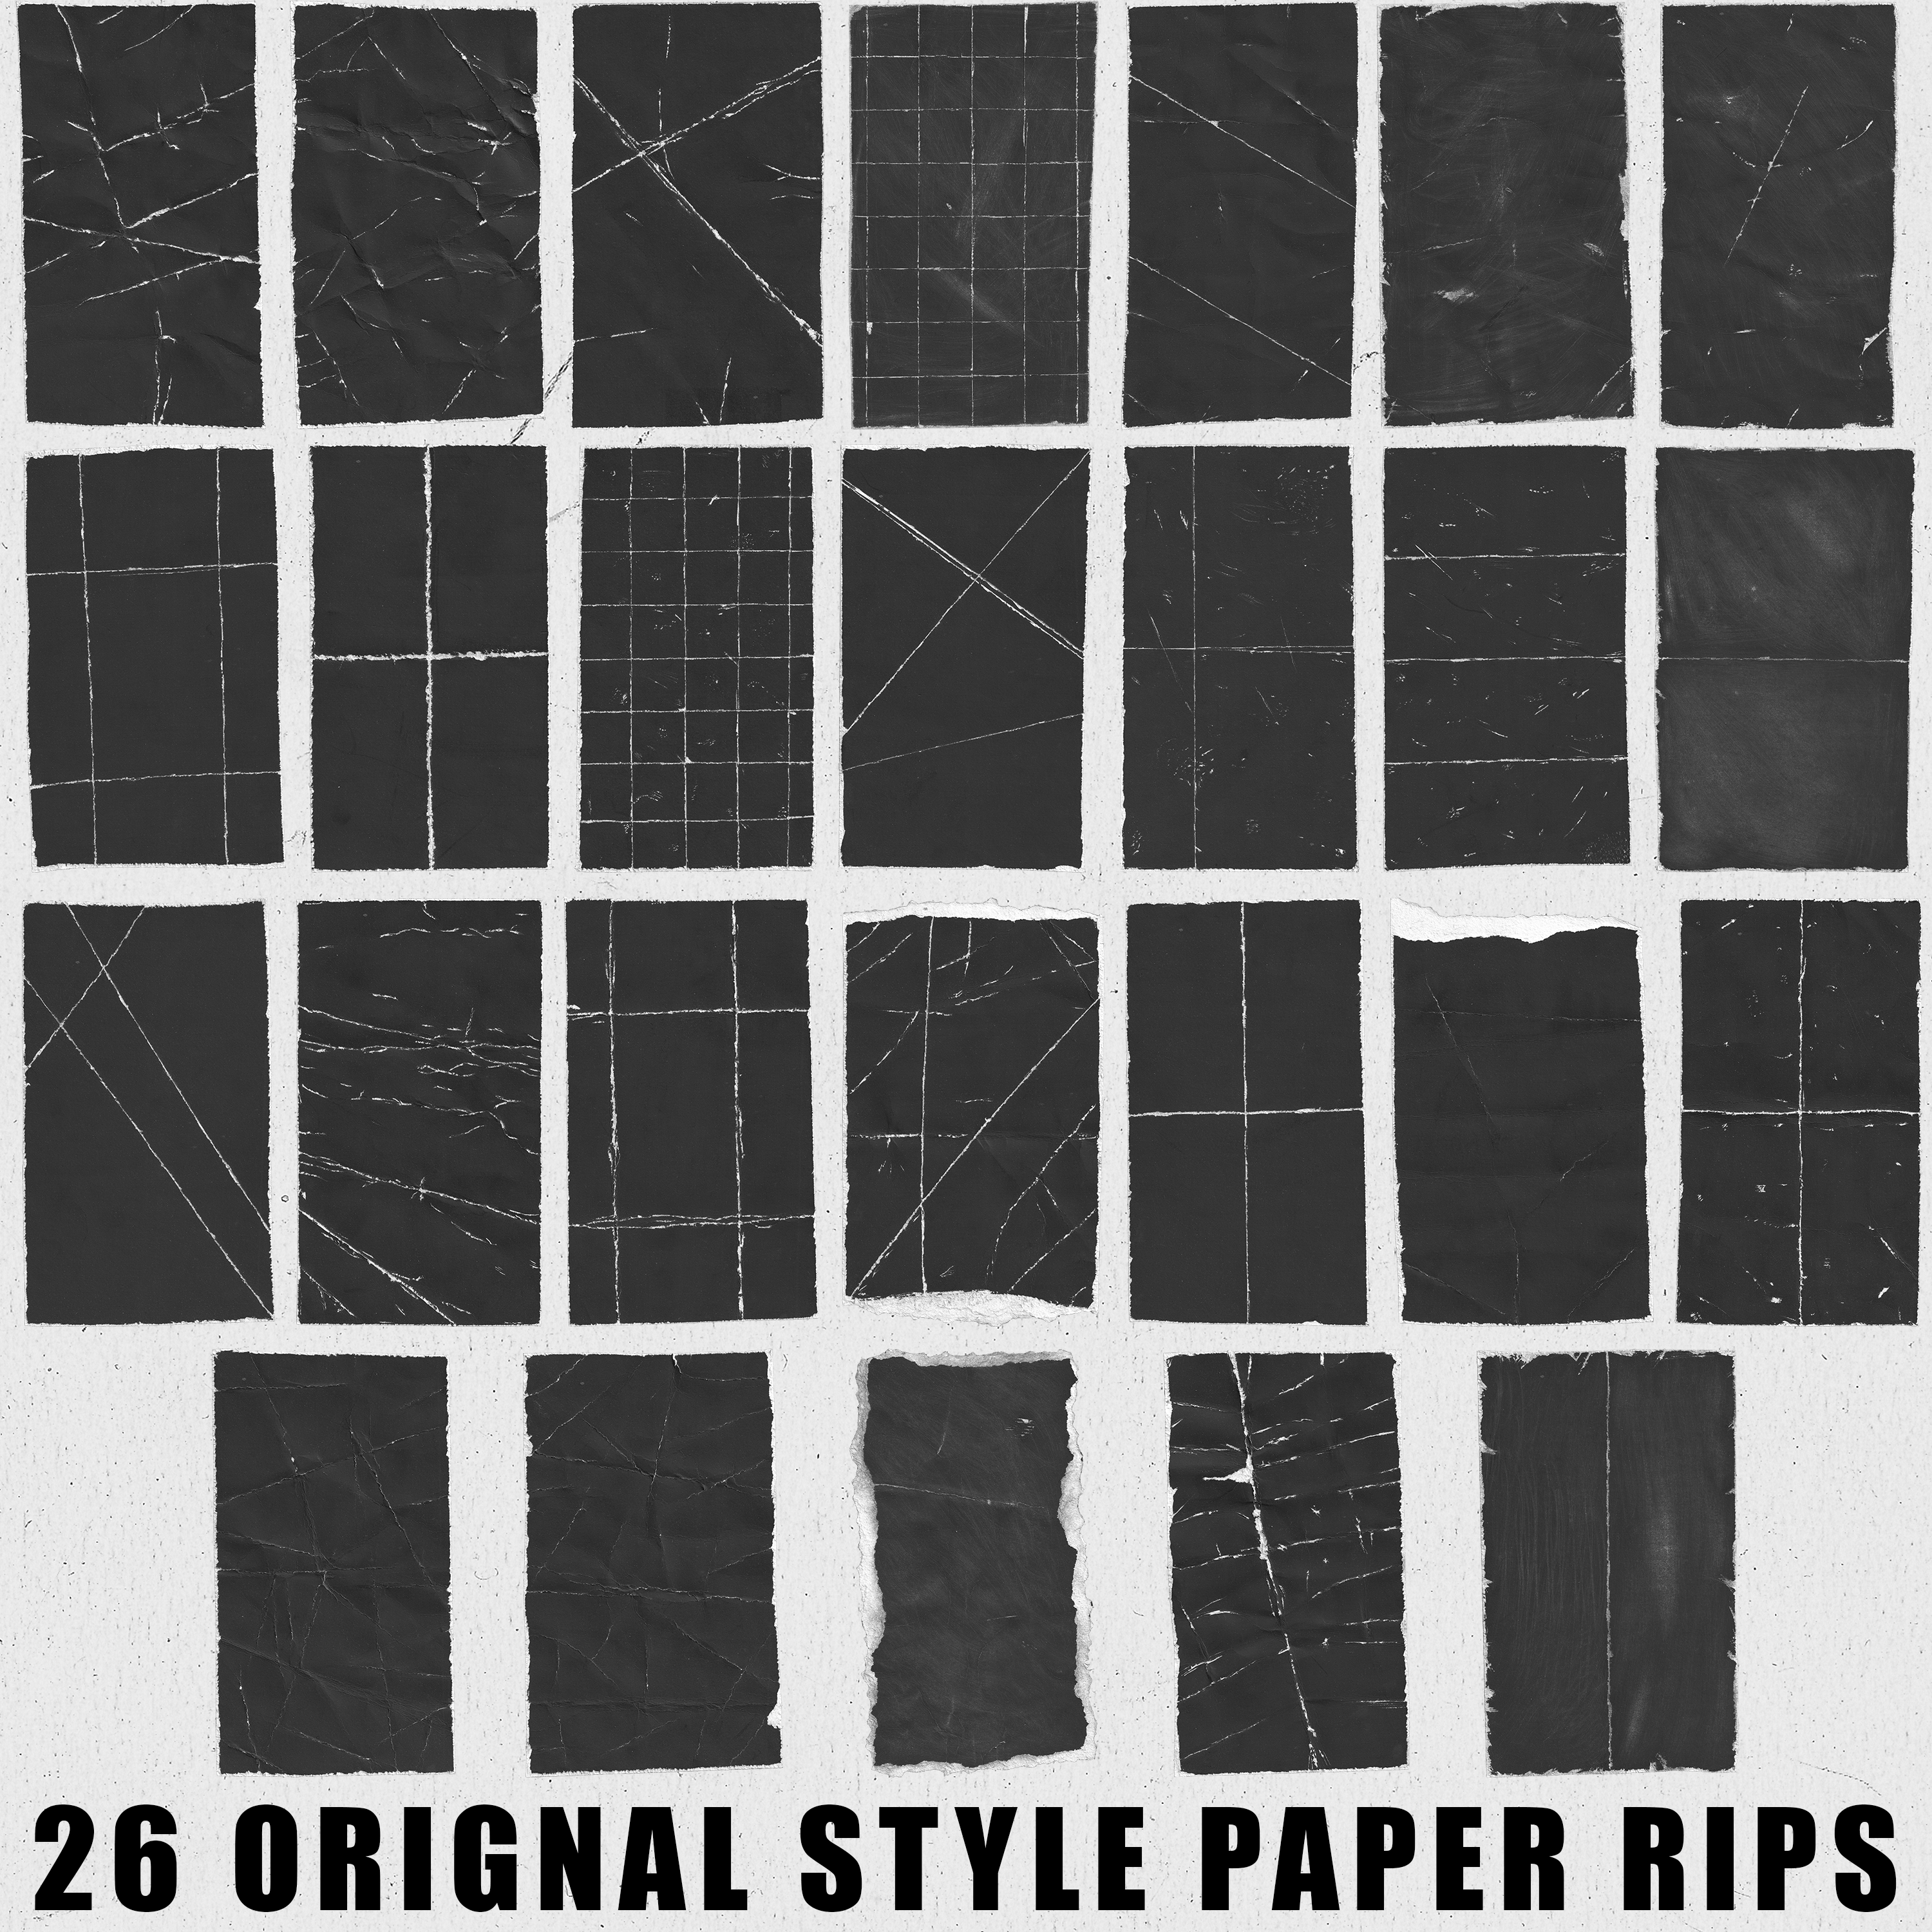 PAPER RIPS AND FOLDS V2